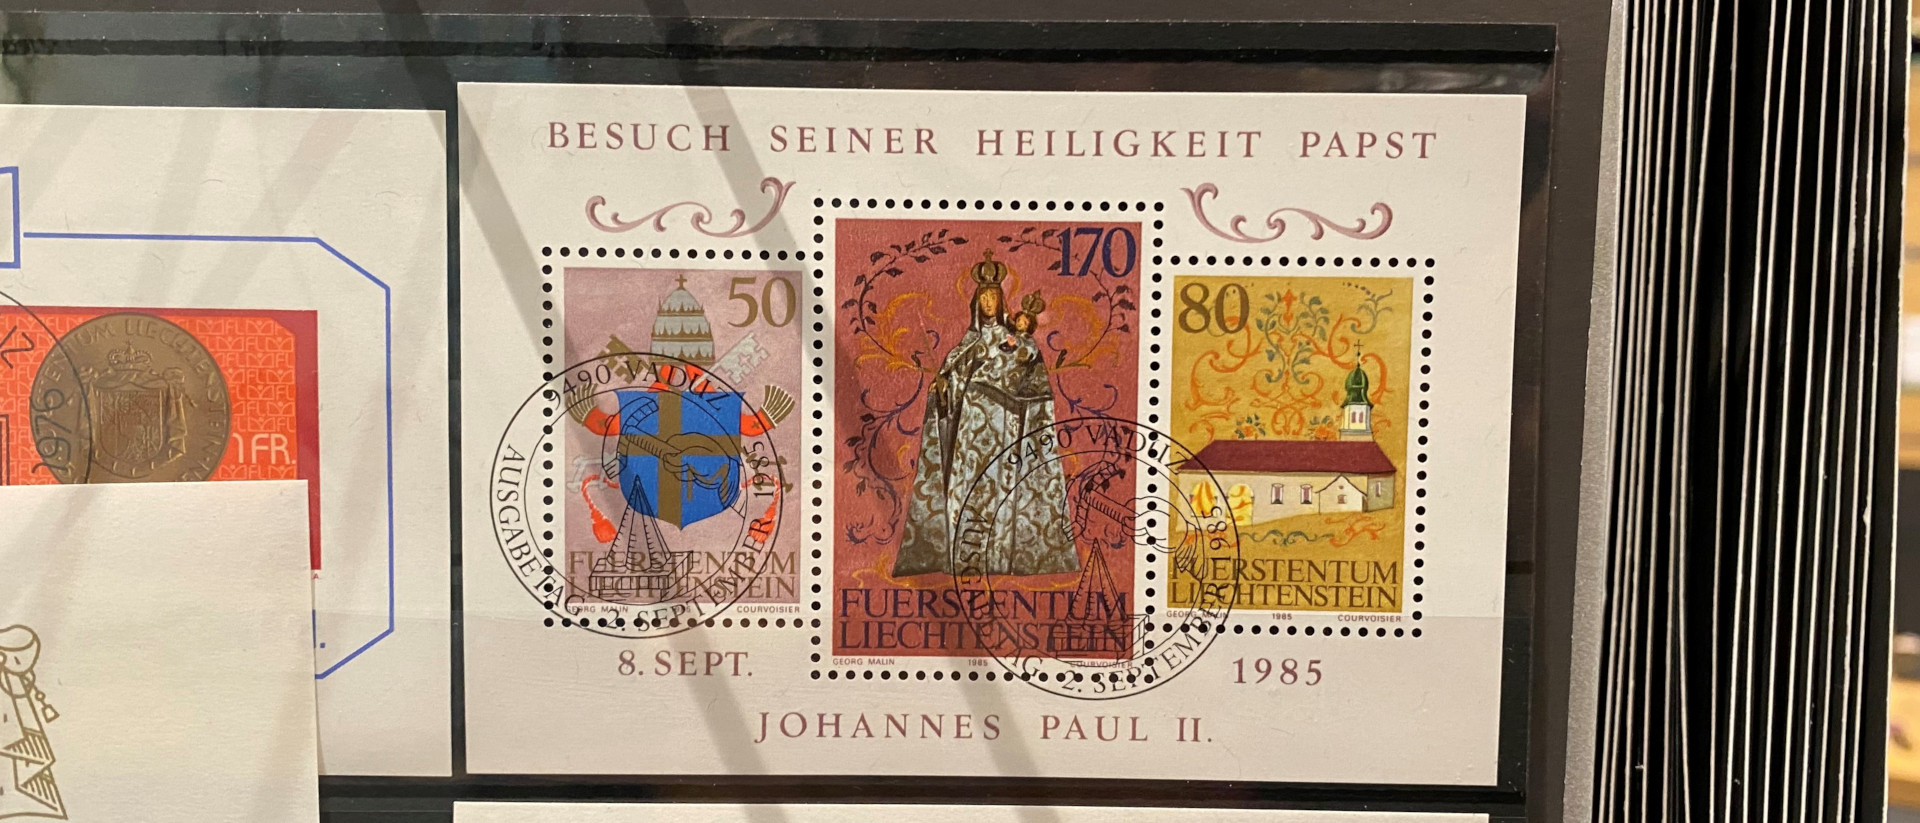 Stamps from the Pope's visit to Liechtenstein in 1985